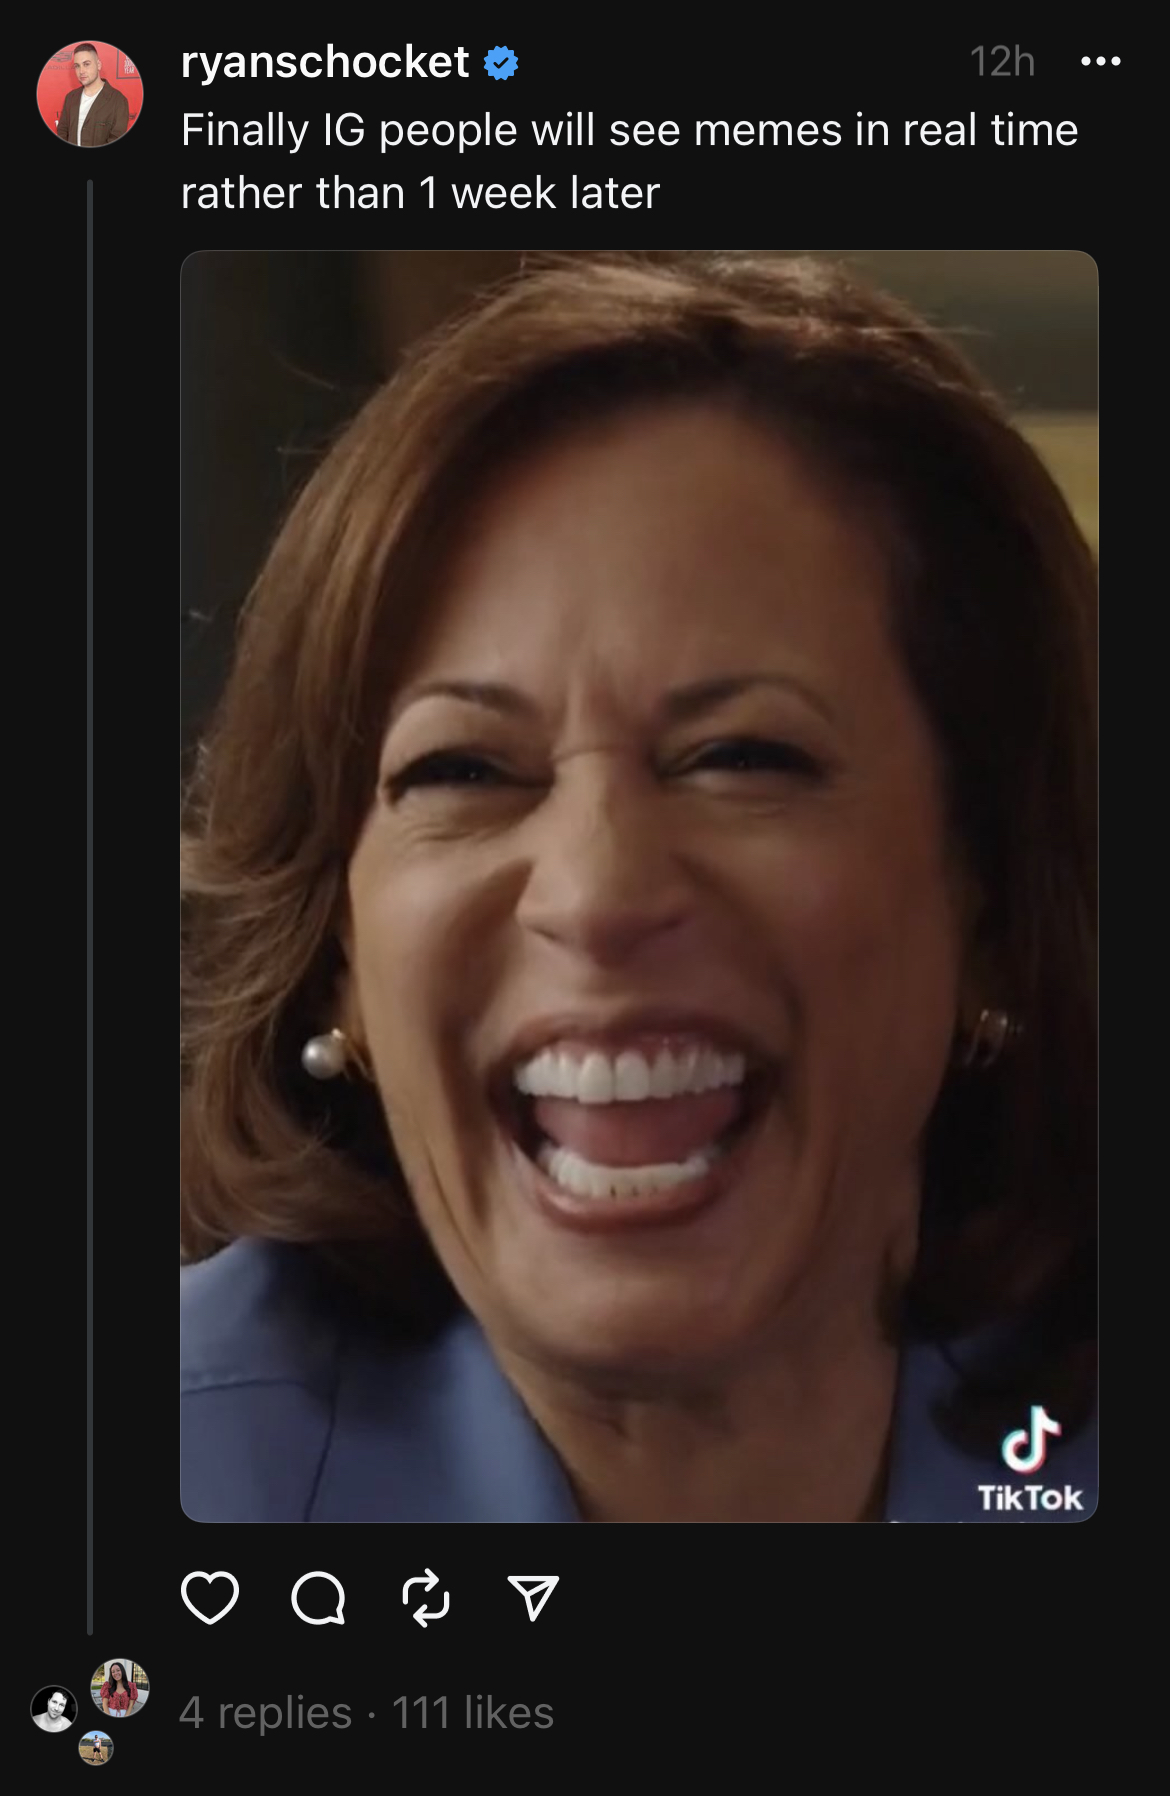 A thread showing VP Kamala Harris smiling widely with the caption, &quot;Finally IG people will see memes in real time rather than 1 week later&quot;